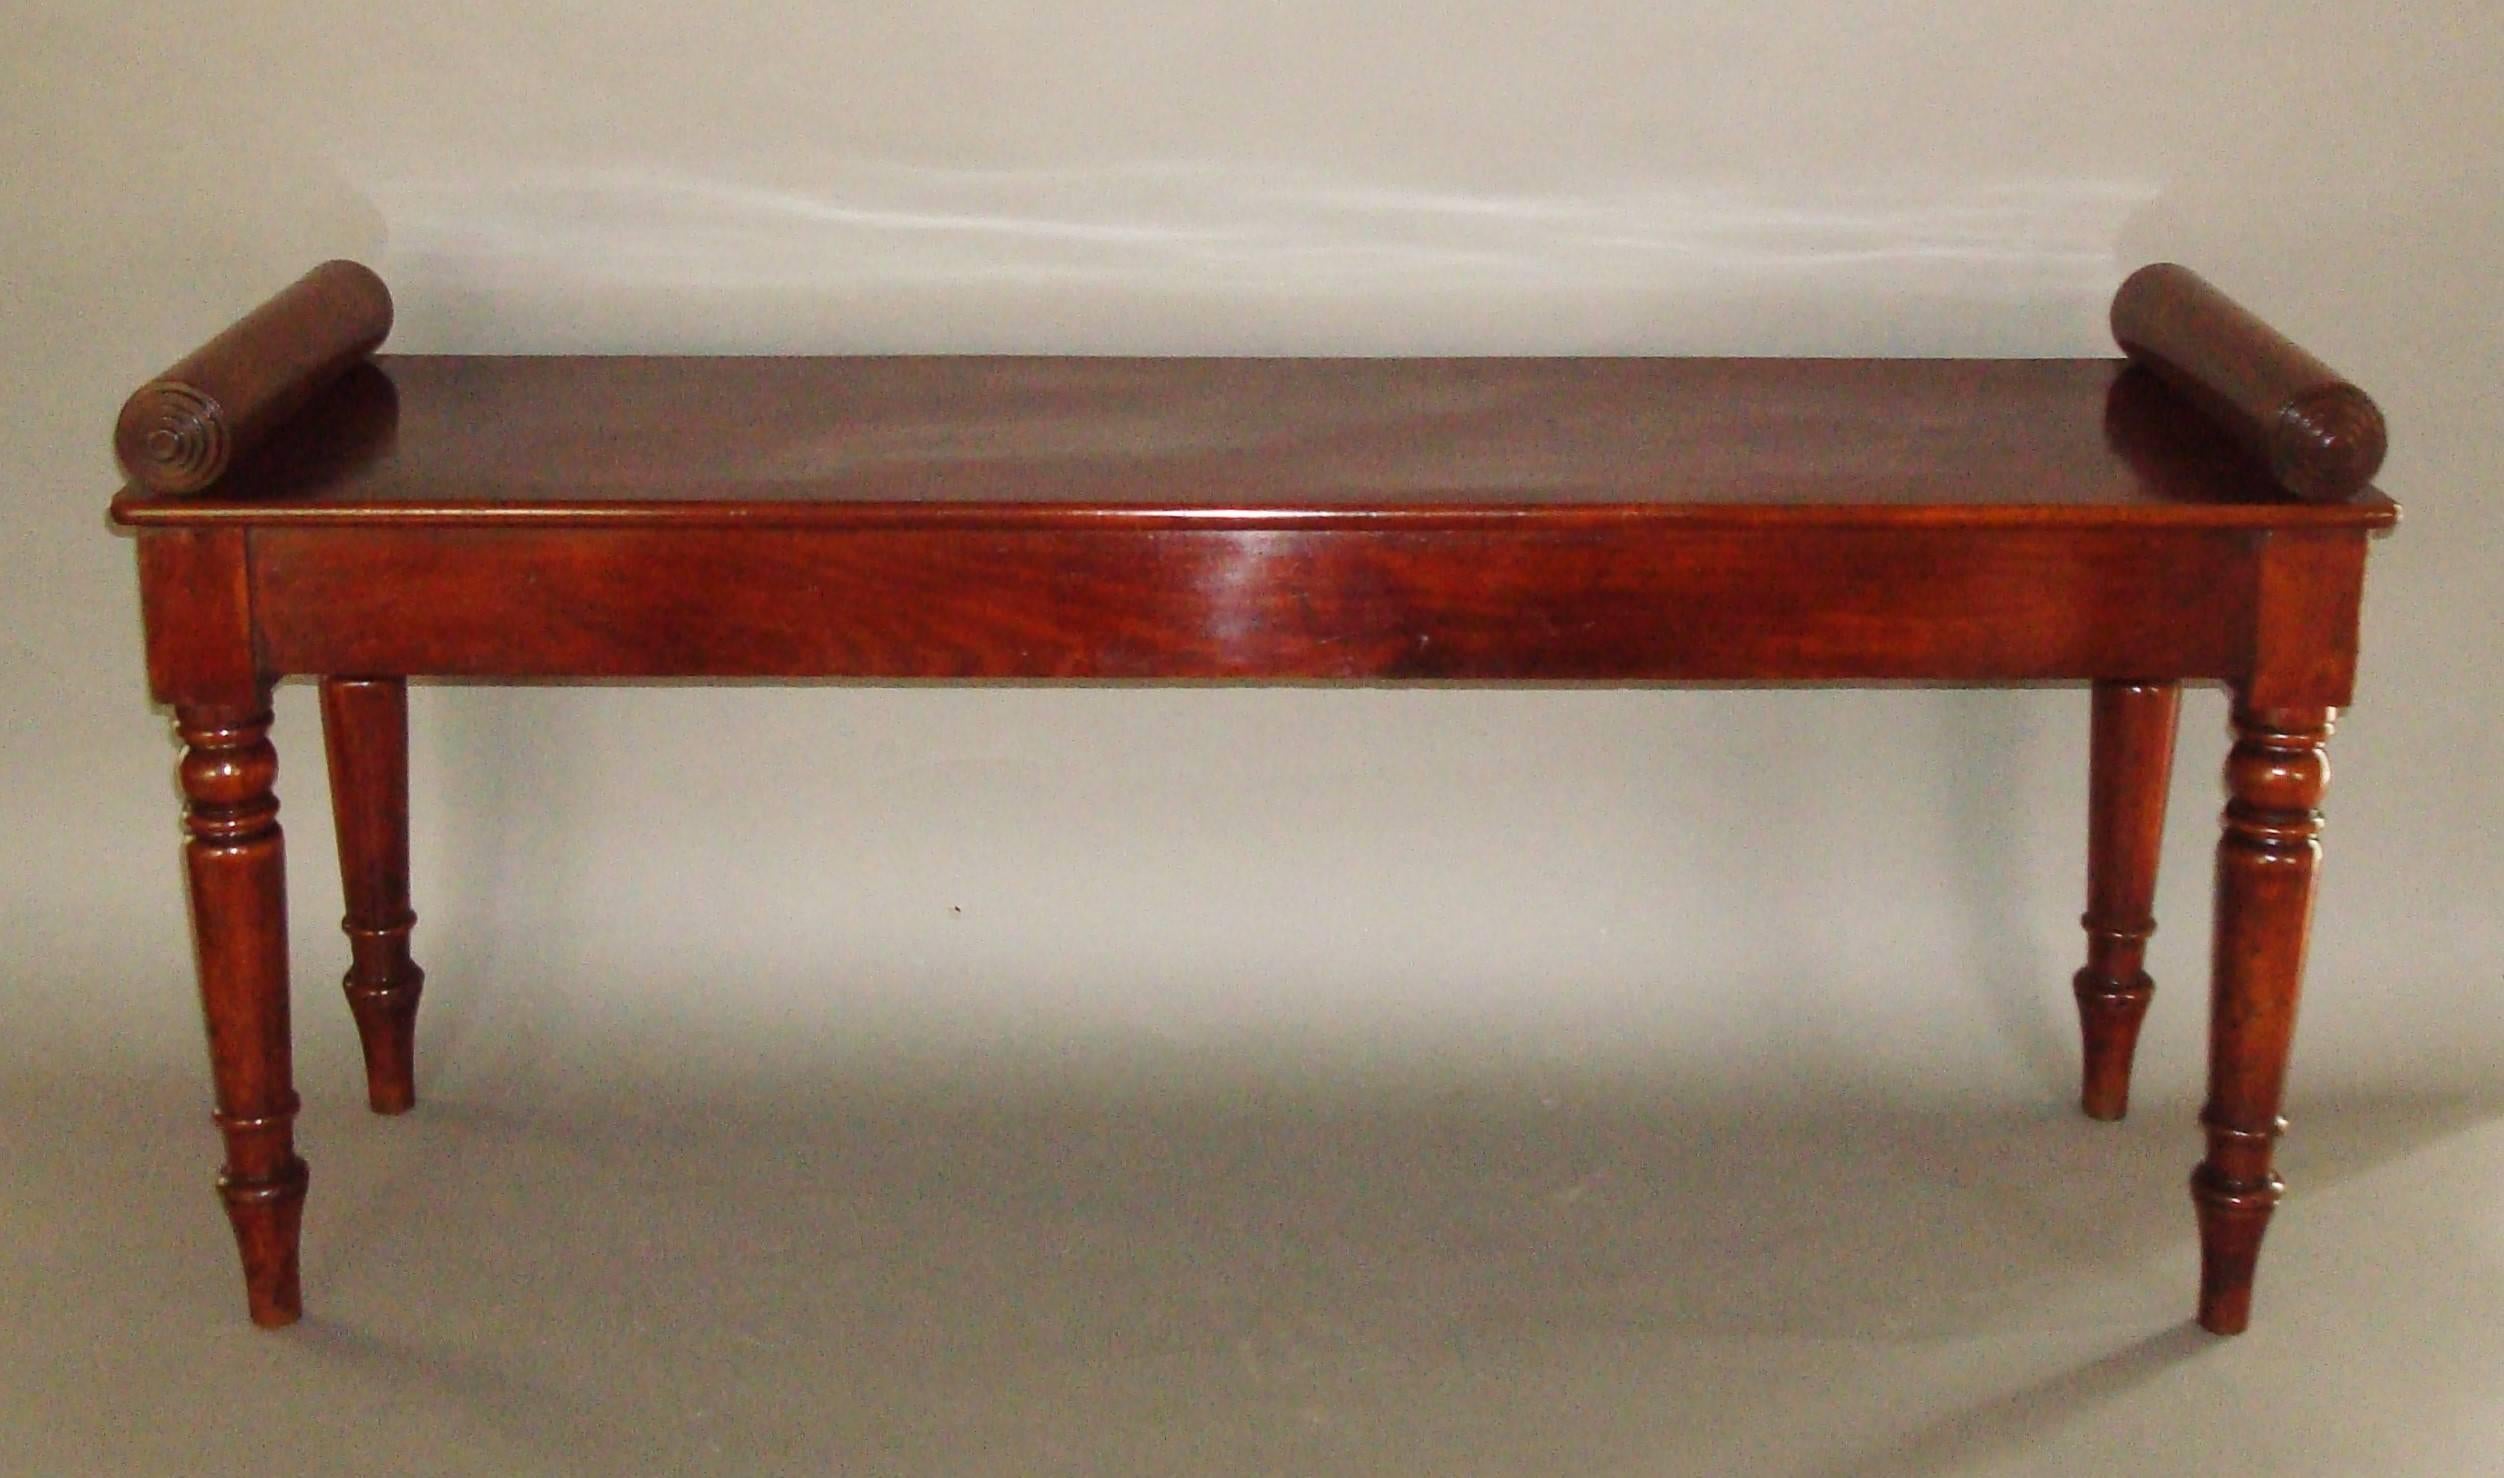 Good quality, late Regency mahogany hall bench or window seat; the well figured rectangular seat with raised scrolled ends terminating in turned reeded paterae; above a simple frieze raised on turned tapering legs finished all the way round so can